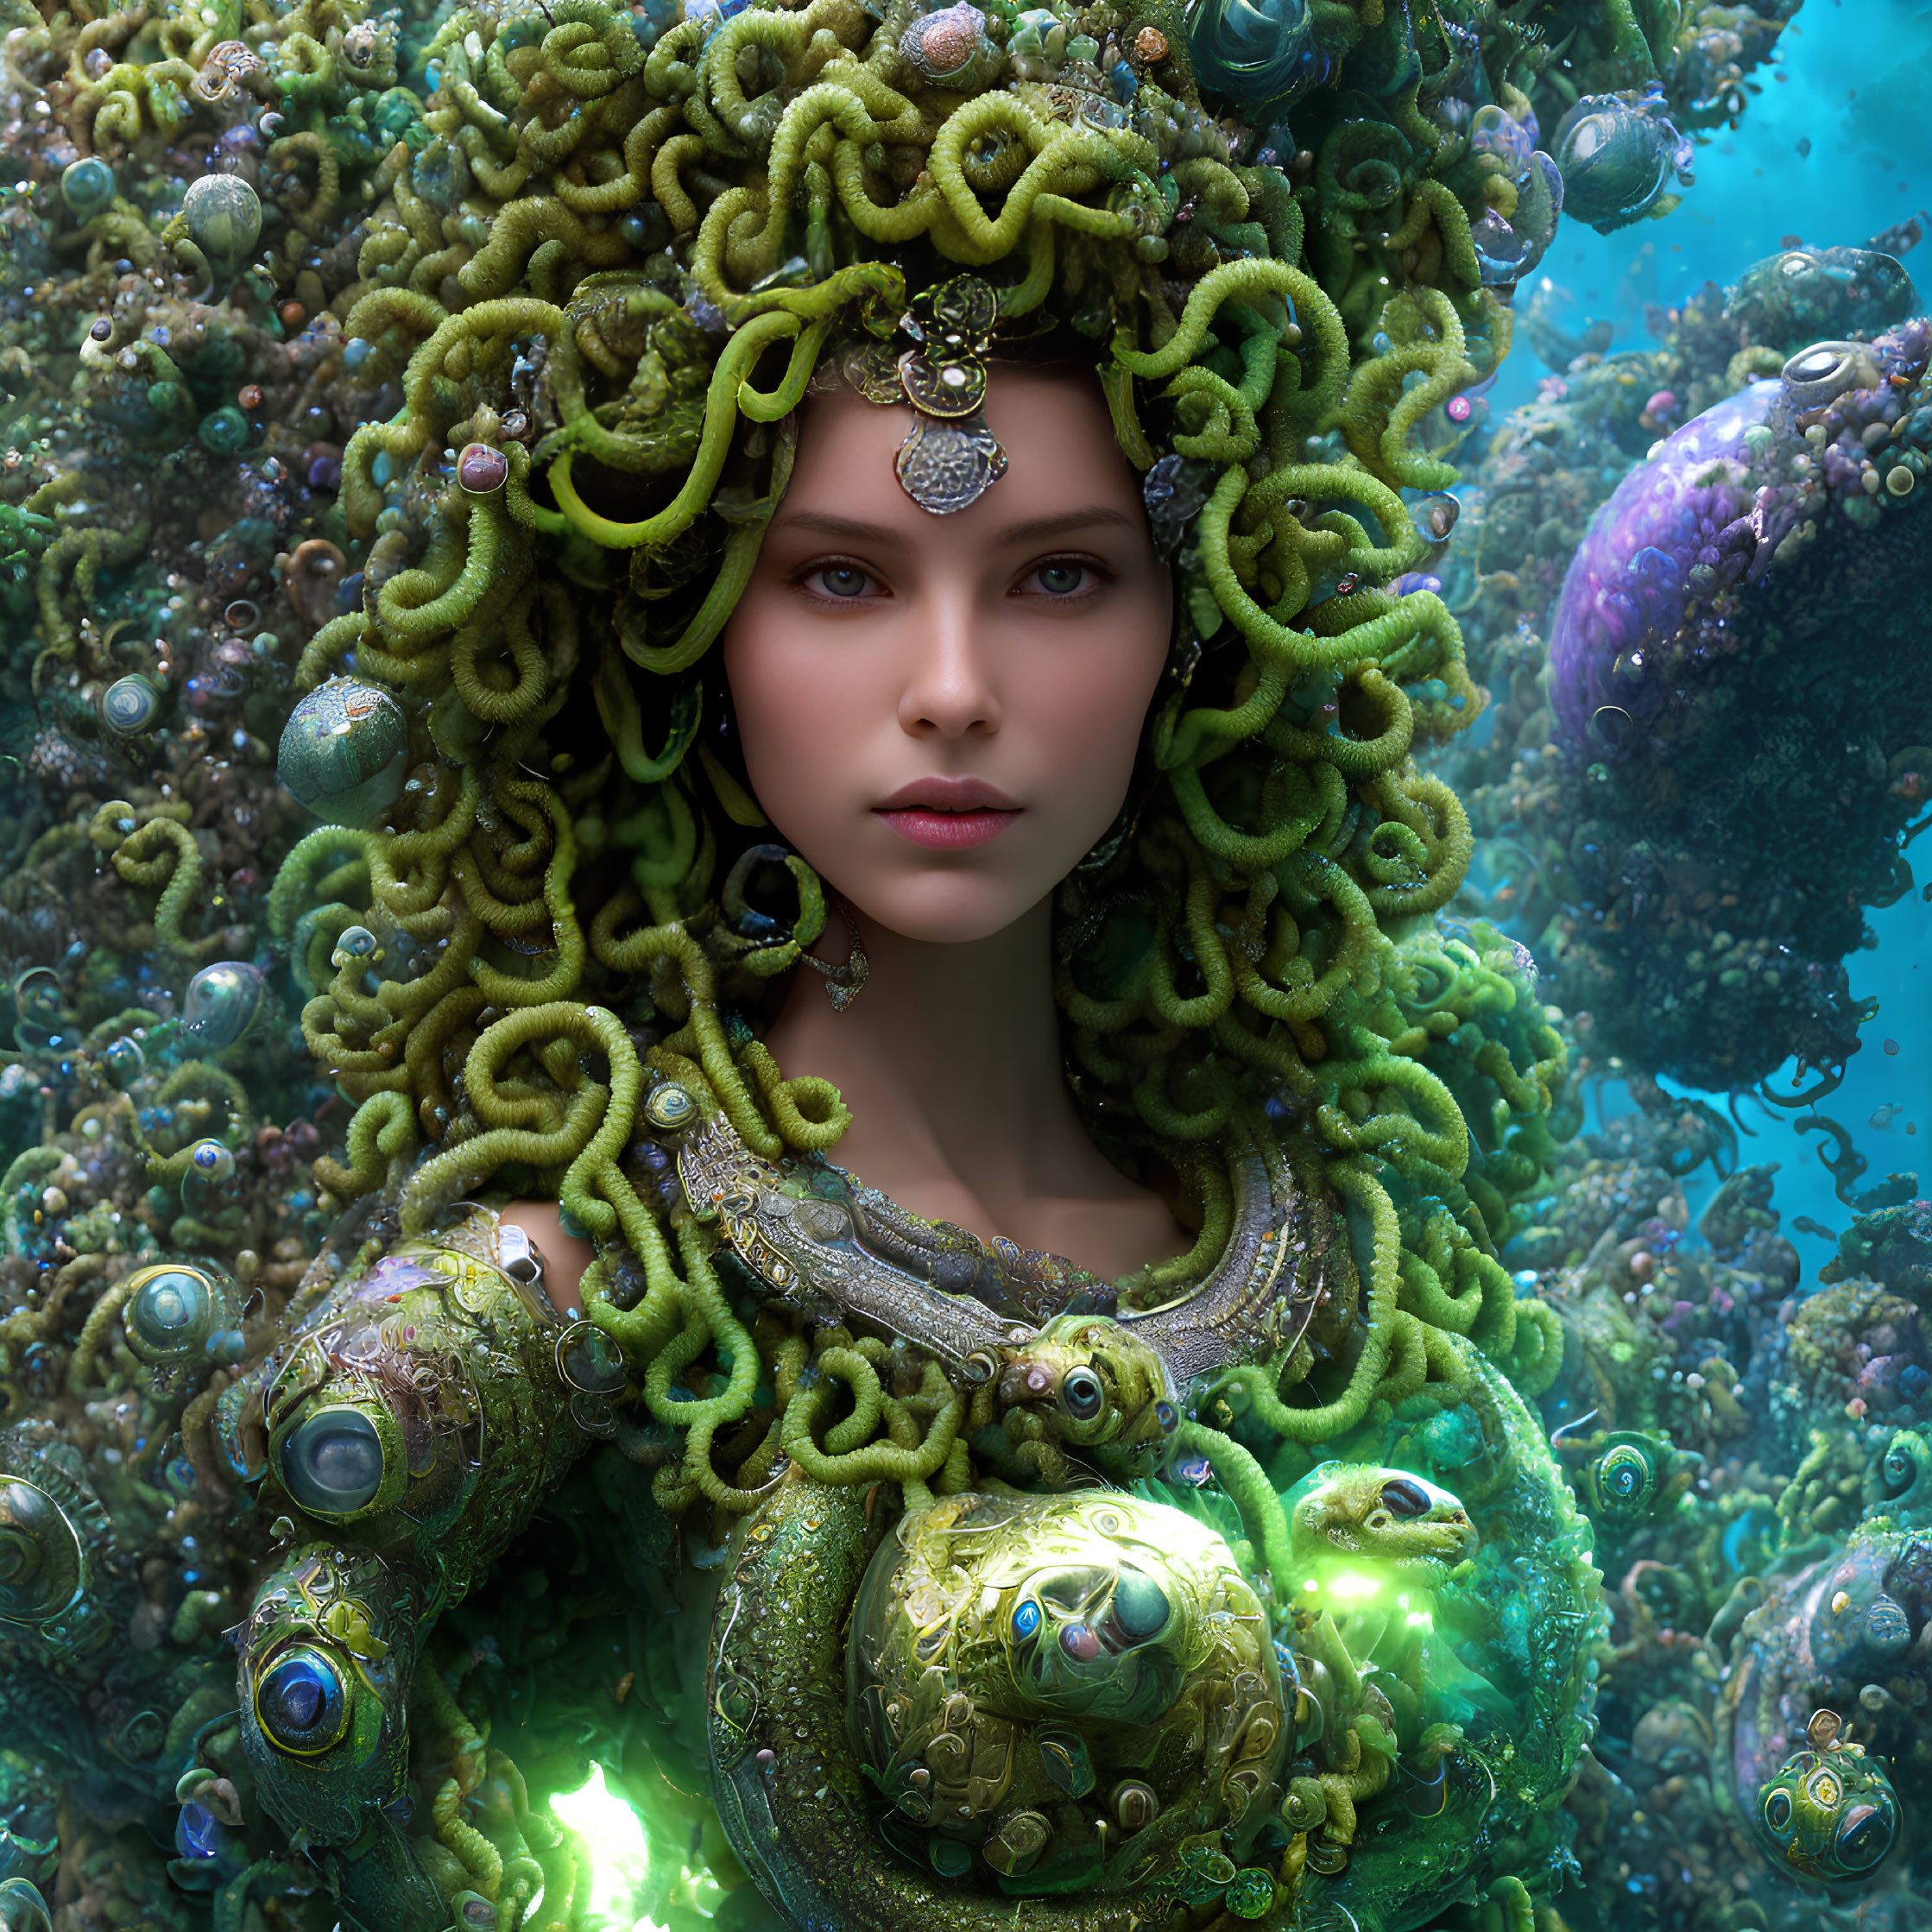 Digital Artwork: Woman adorned with greenery, tentacles, orbs, and ornate jewelry